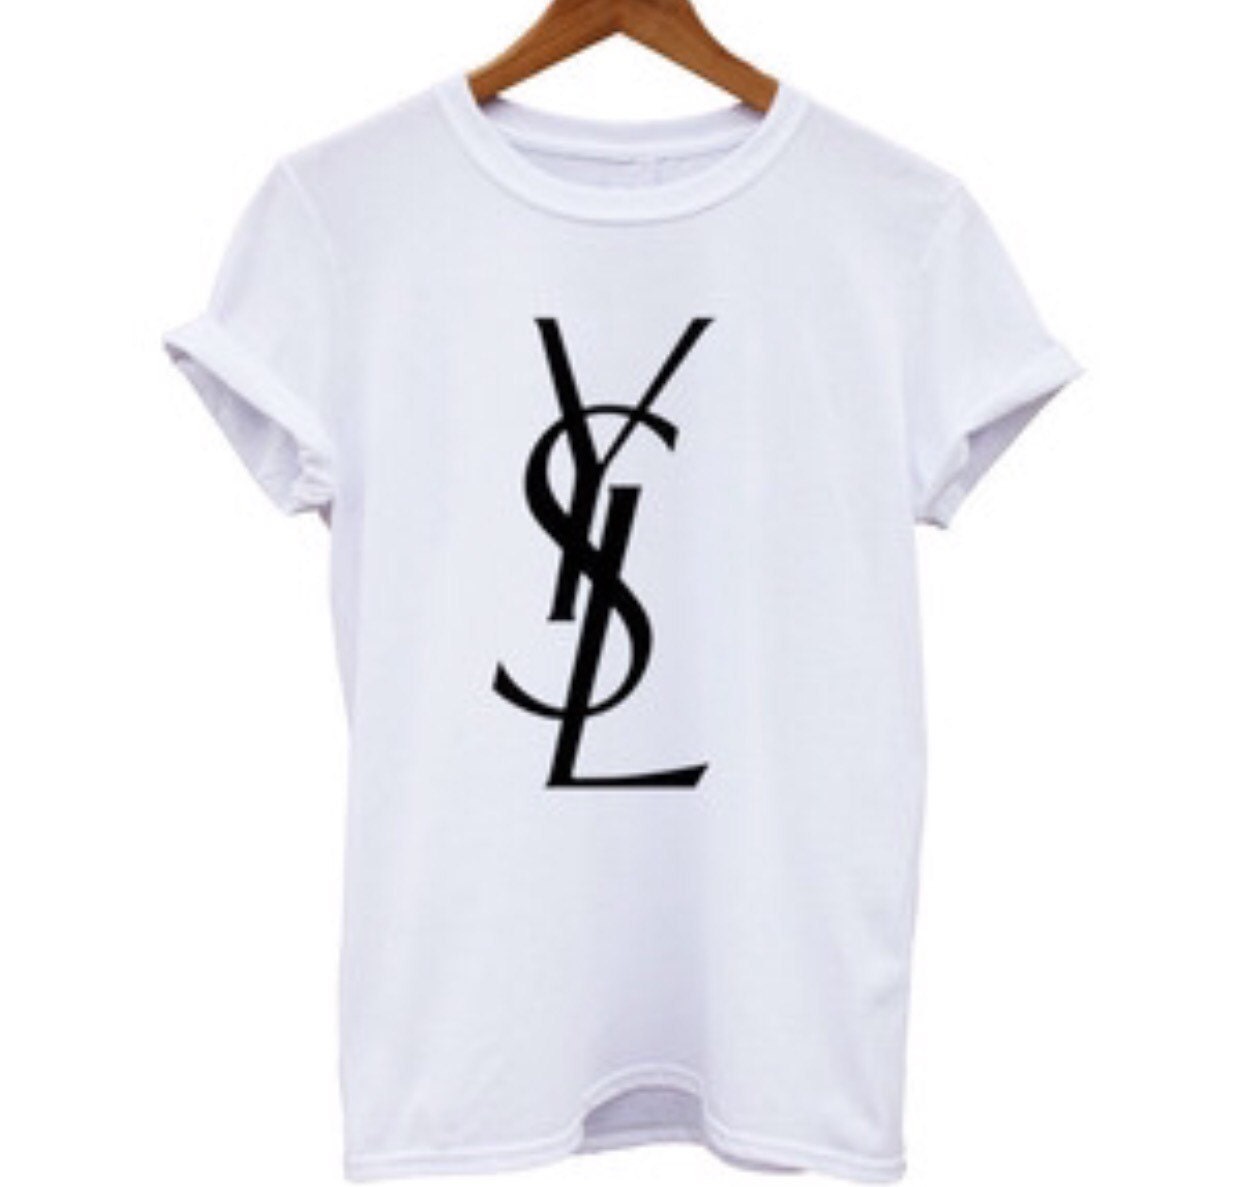 yves saint laurent YSL tshirt t-shirt & tops by Deepacollection